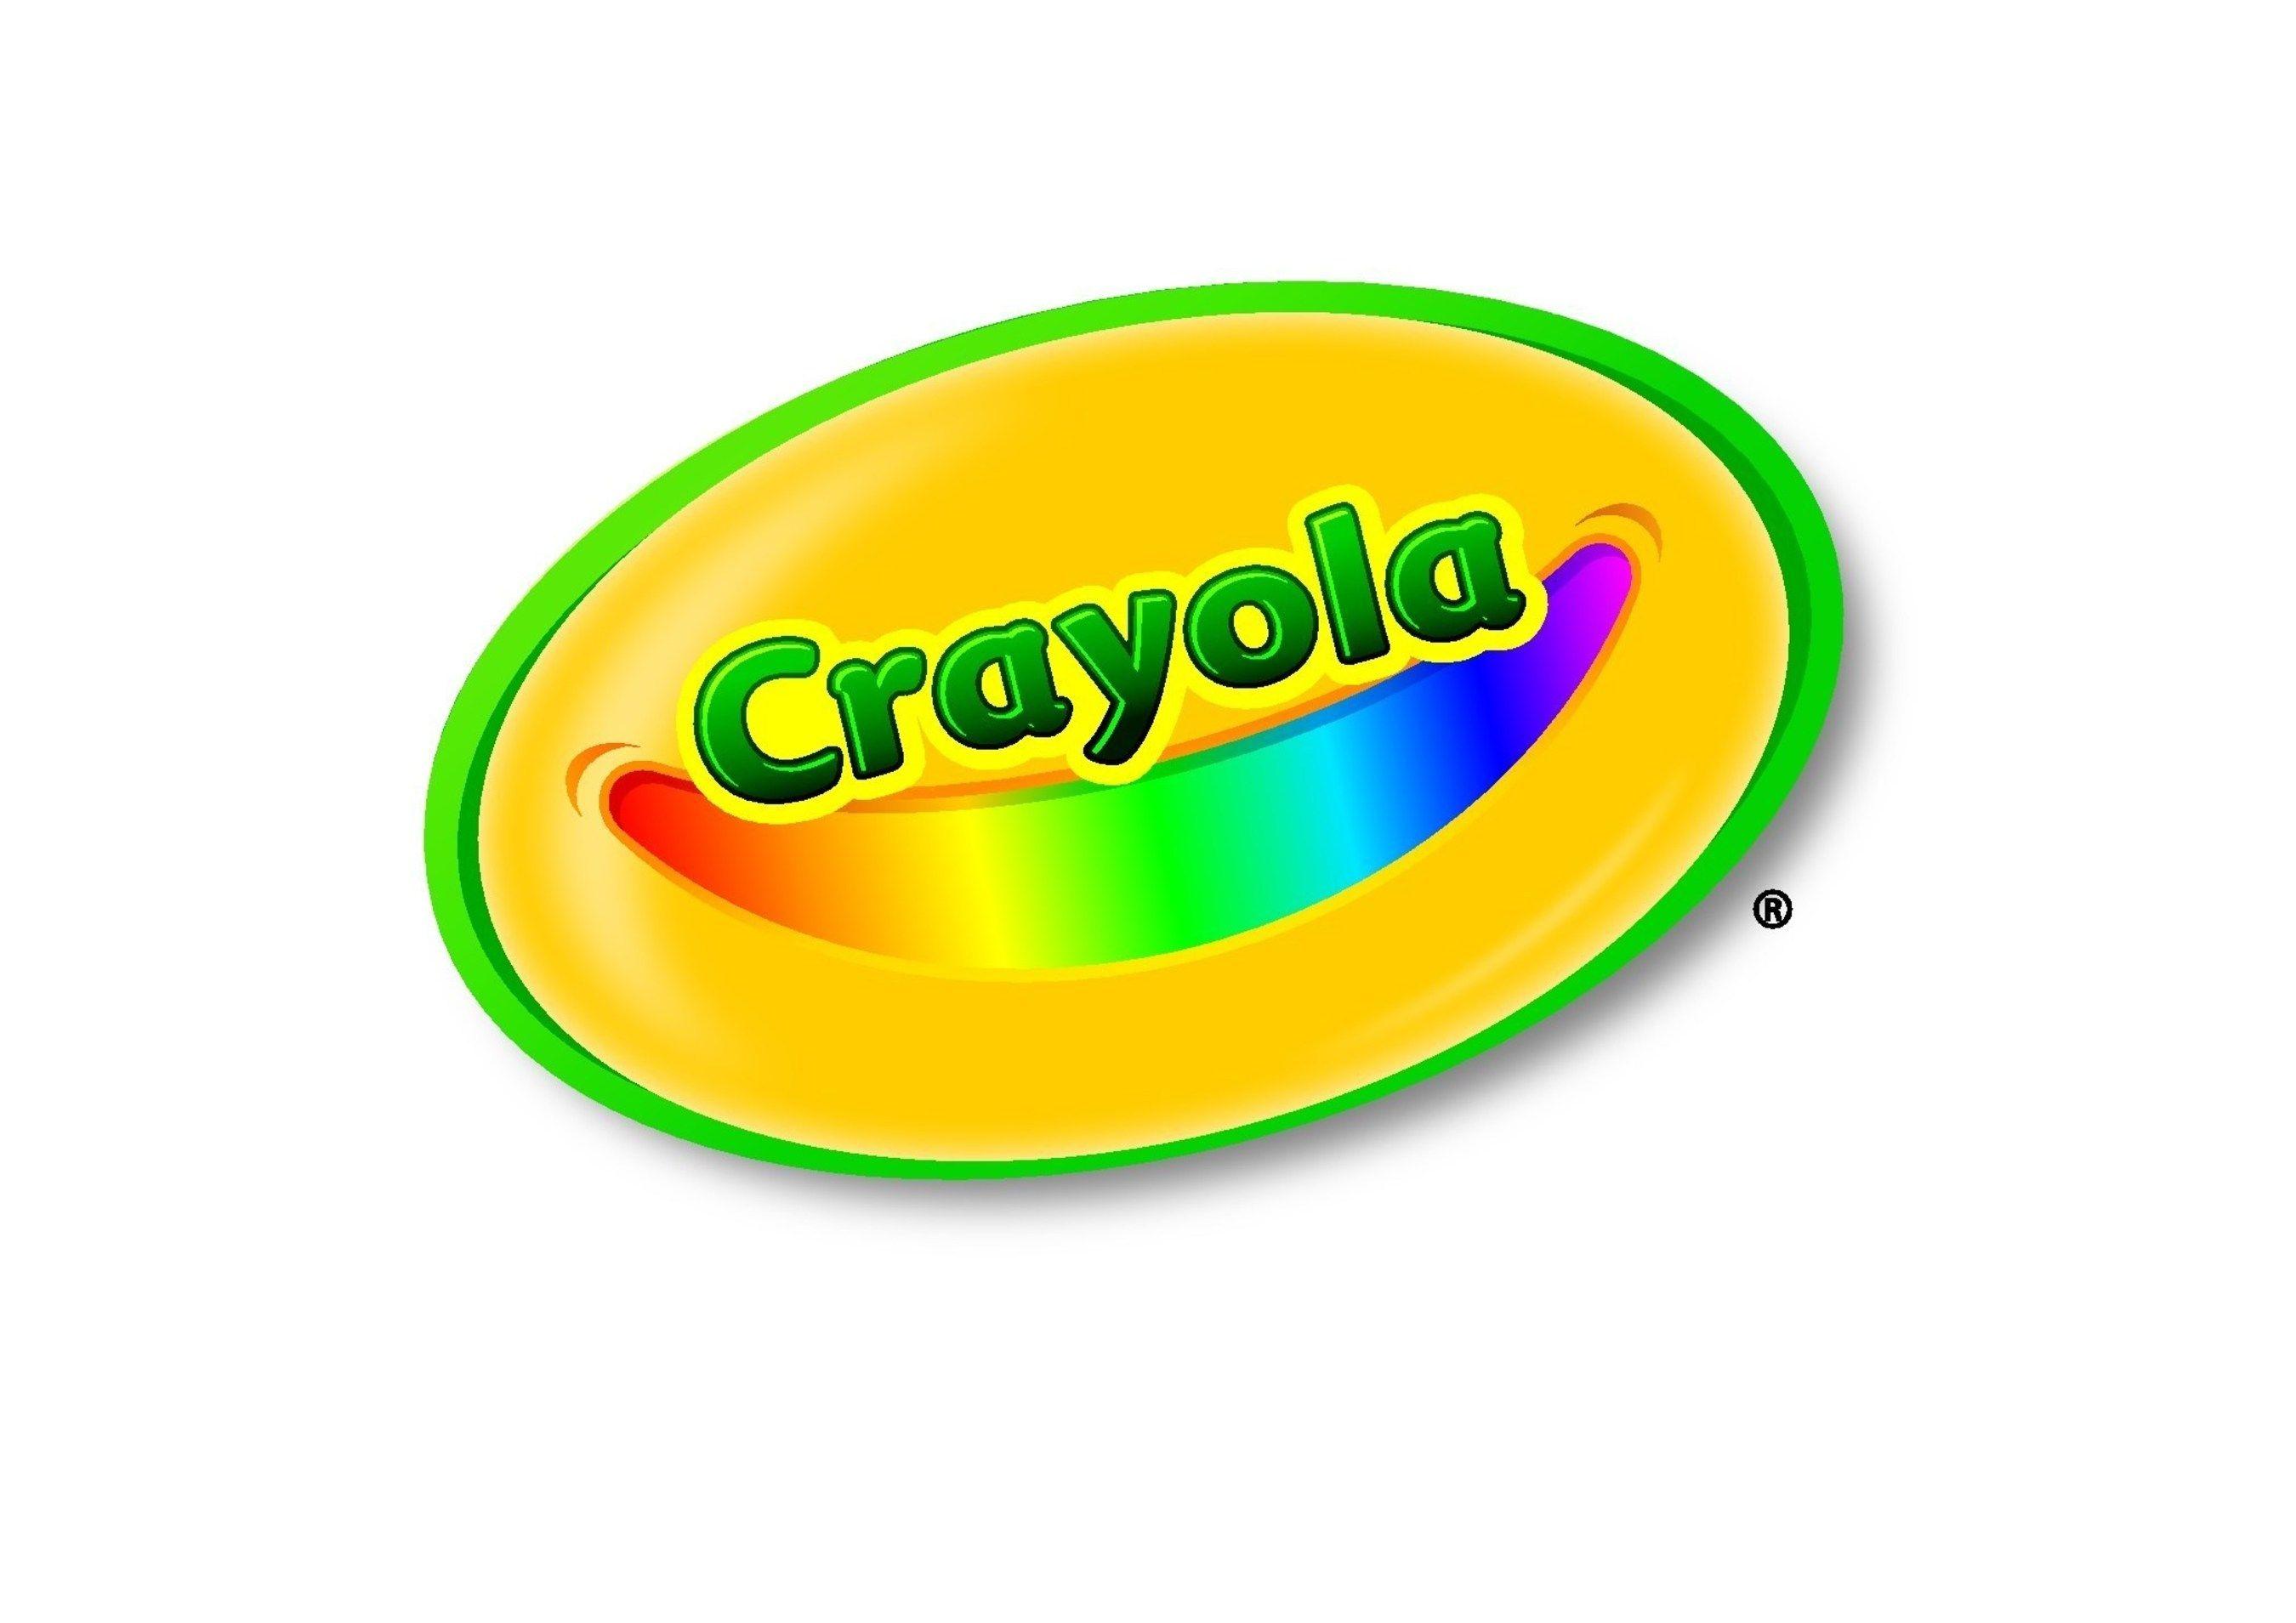 Crayola Logo - New Products from Crayola Bring Color to Life for Kids